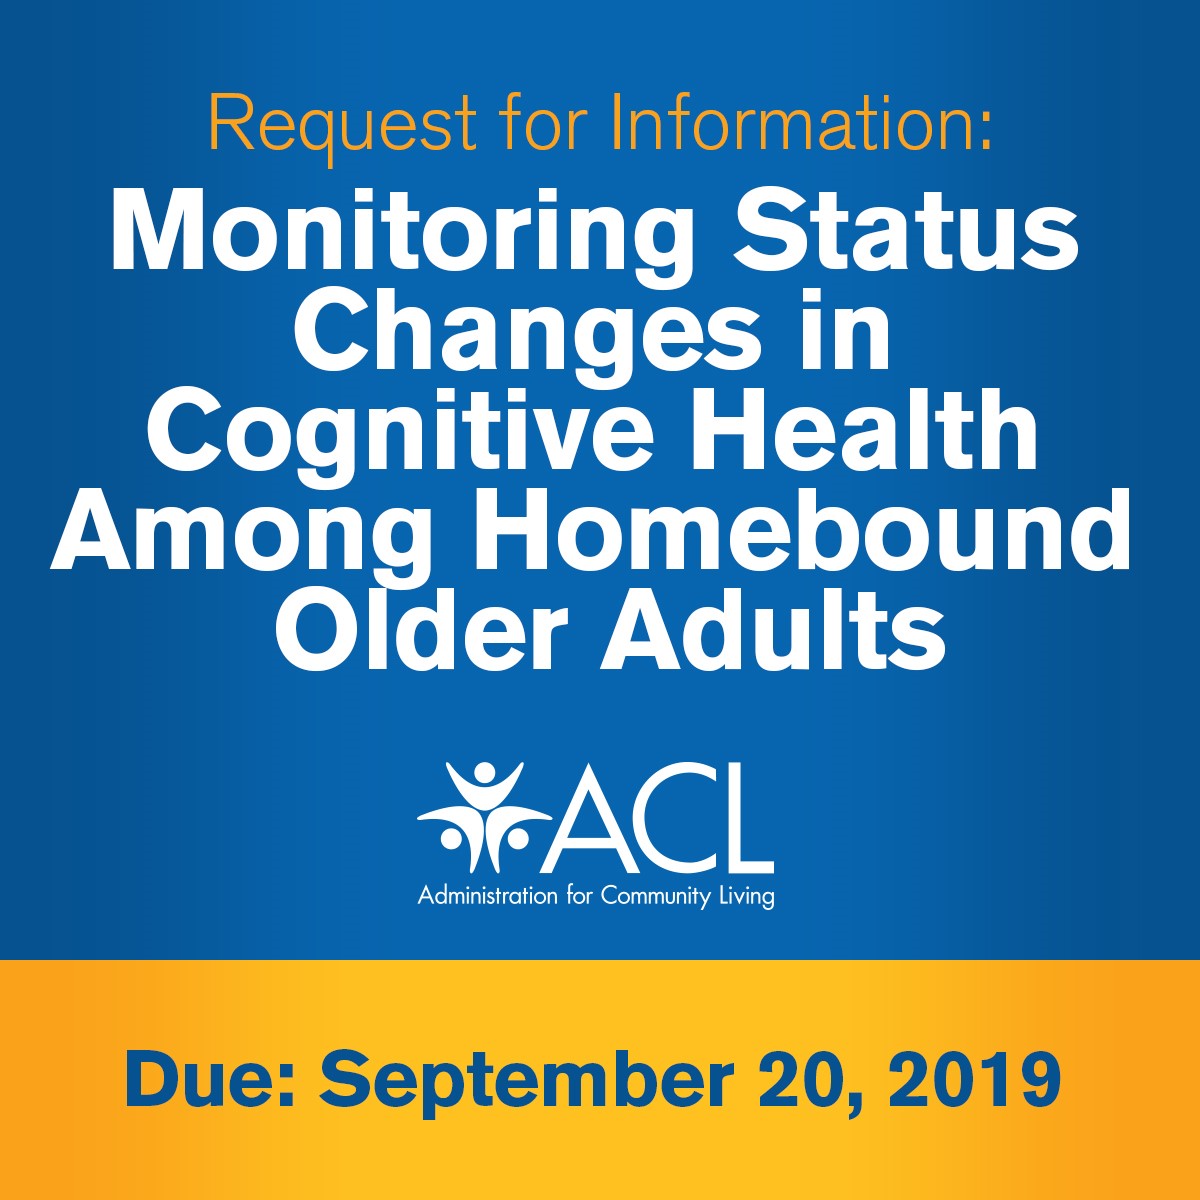 Request for information: Monitoring Status Changes in Cognitive Health Among Homebound Older Adults due September 20, 2019